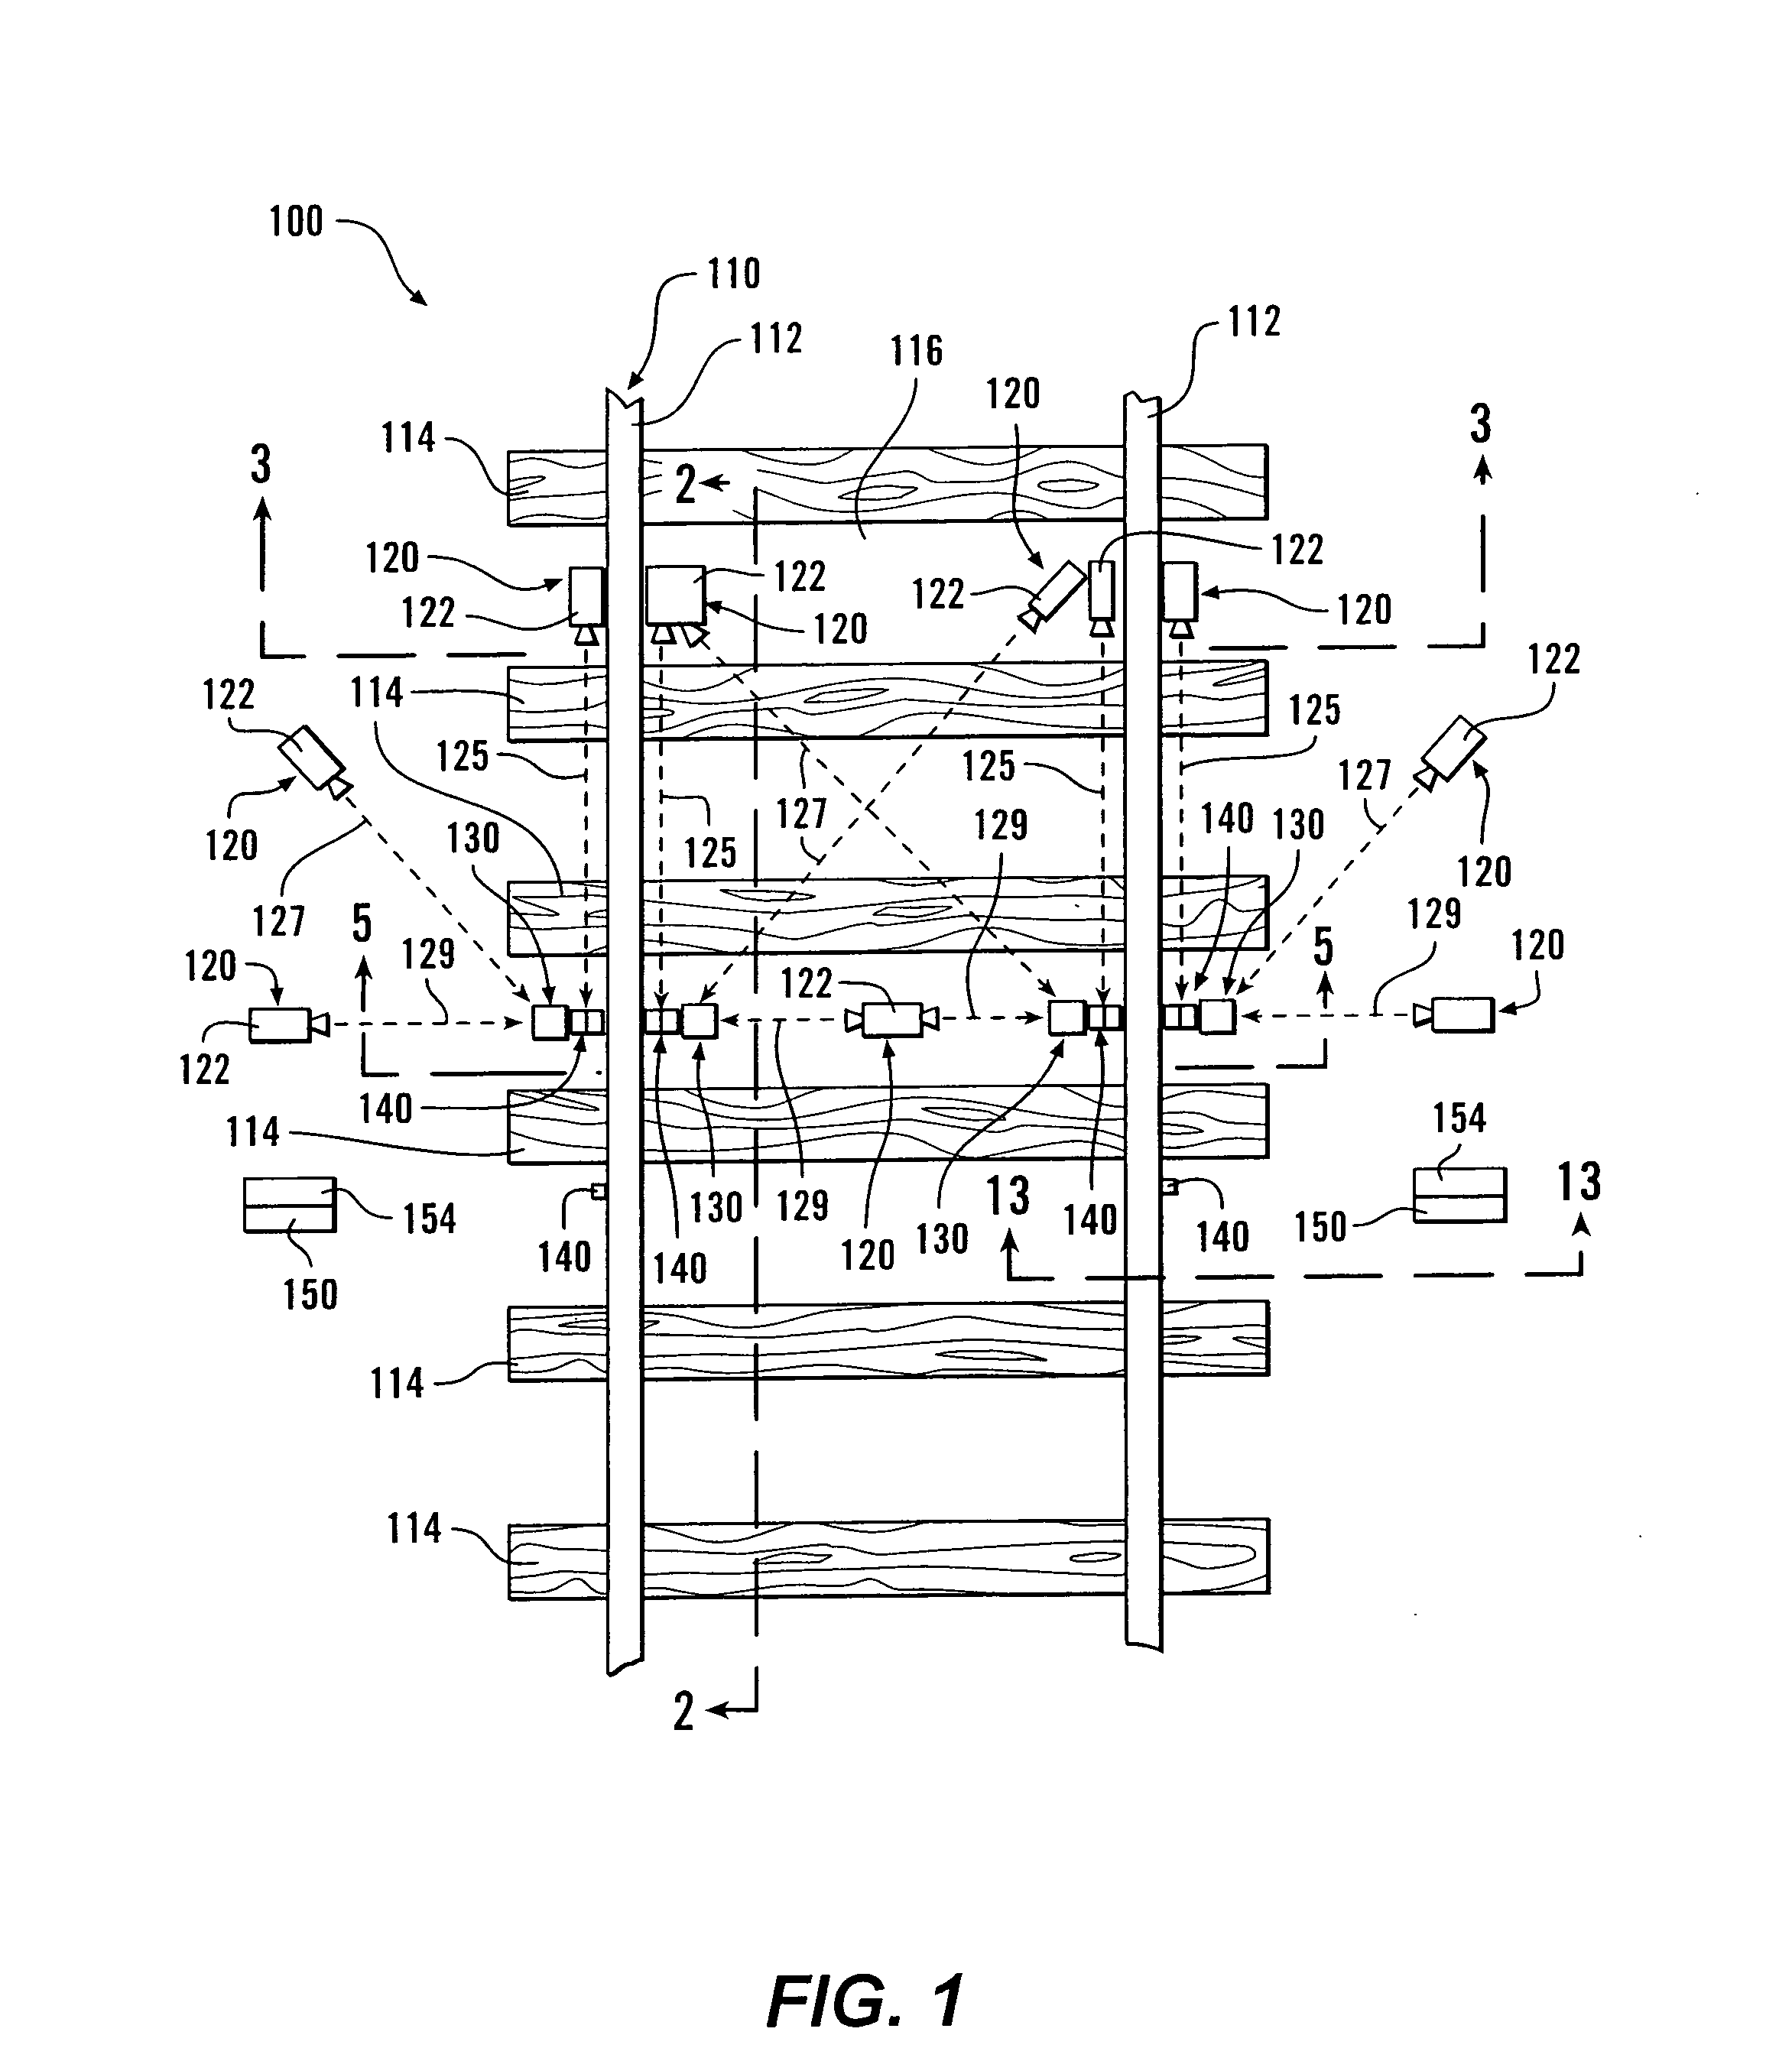 Systems and methods for obtaining improved accuracy measurements of moving rolling stock components